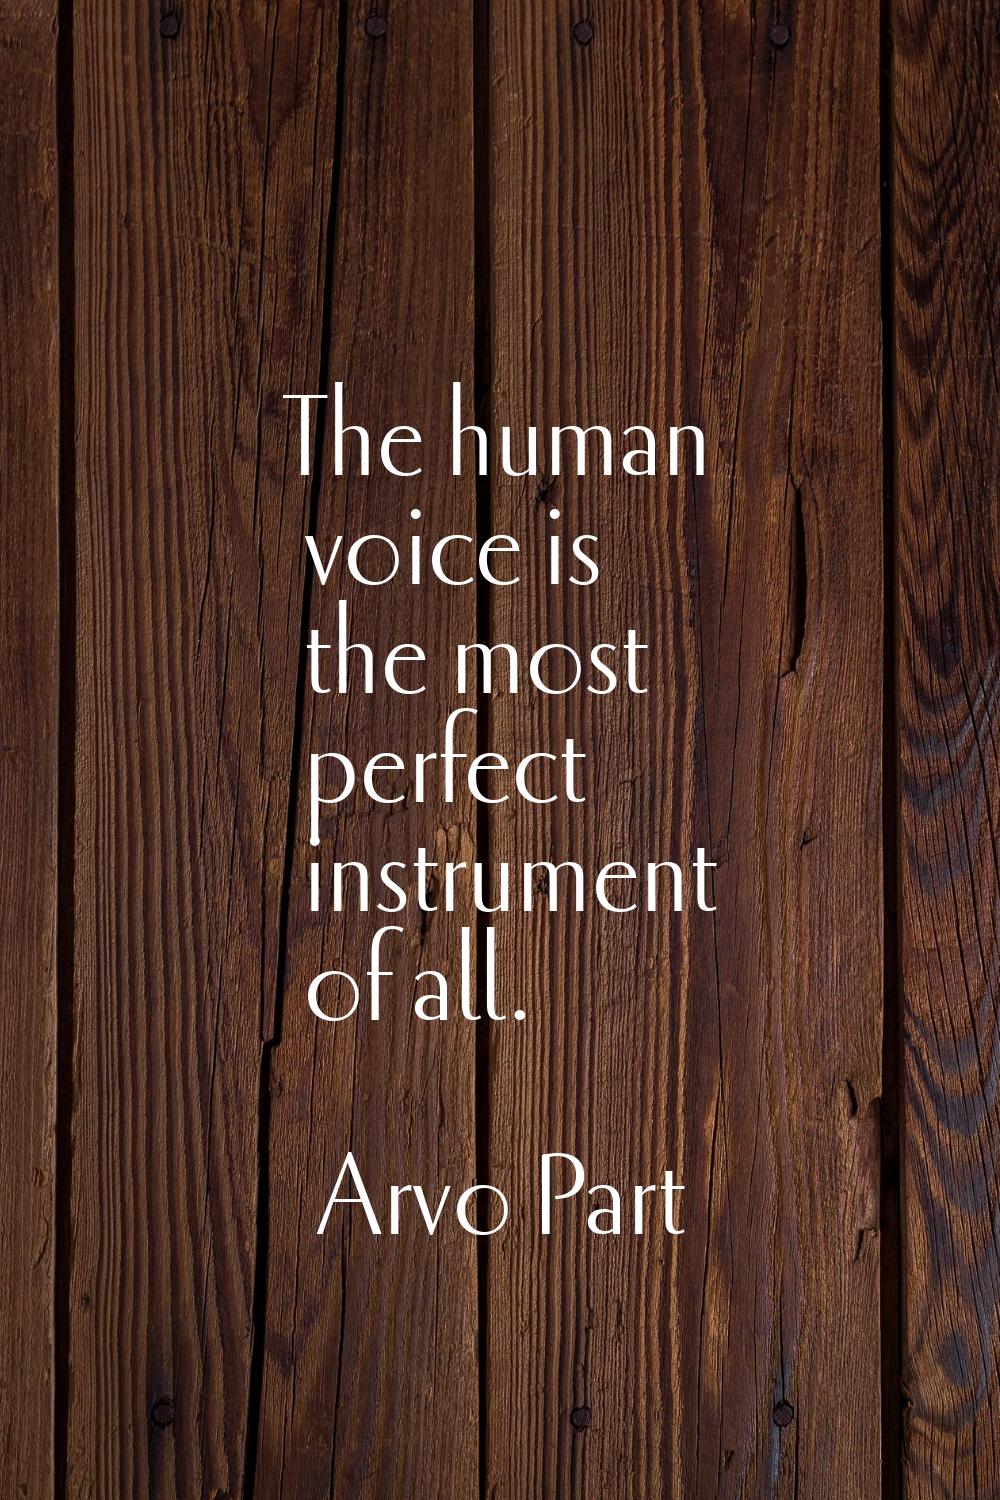 The human voice is the most perfect instrument of all.